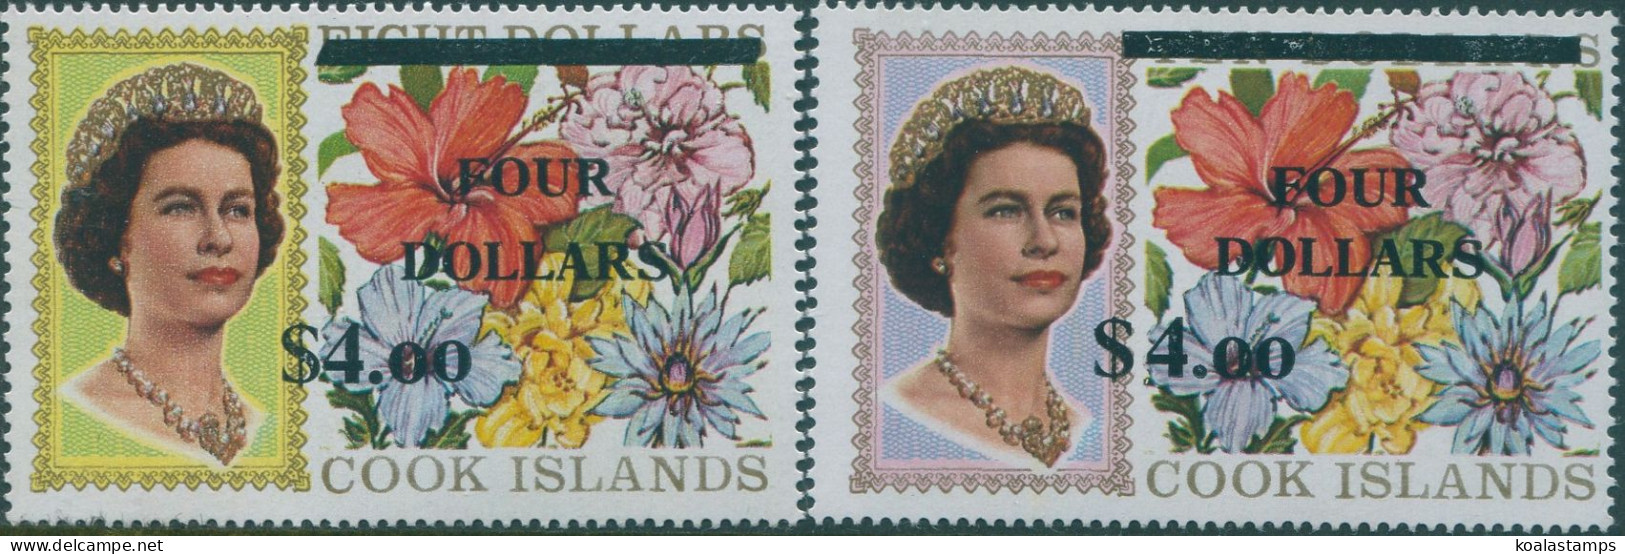 Cook Islands 1970 SG335-336 $4 Surcharges QEII Flowers Set MNH - Cook Islands